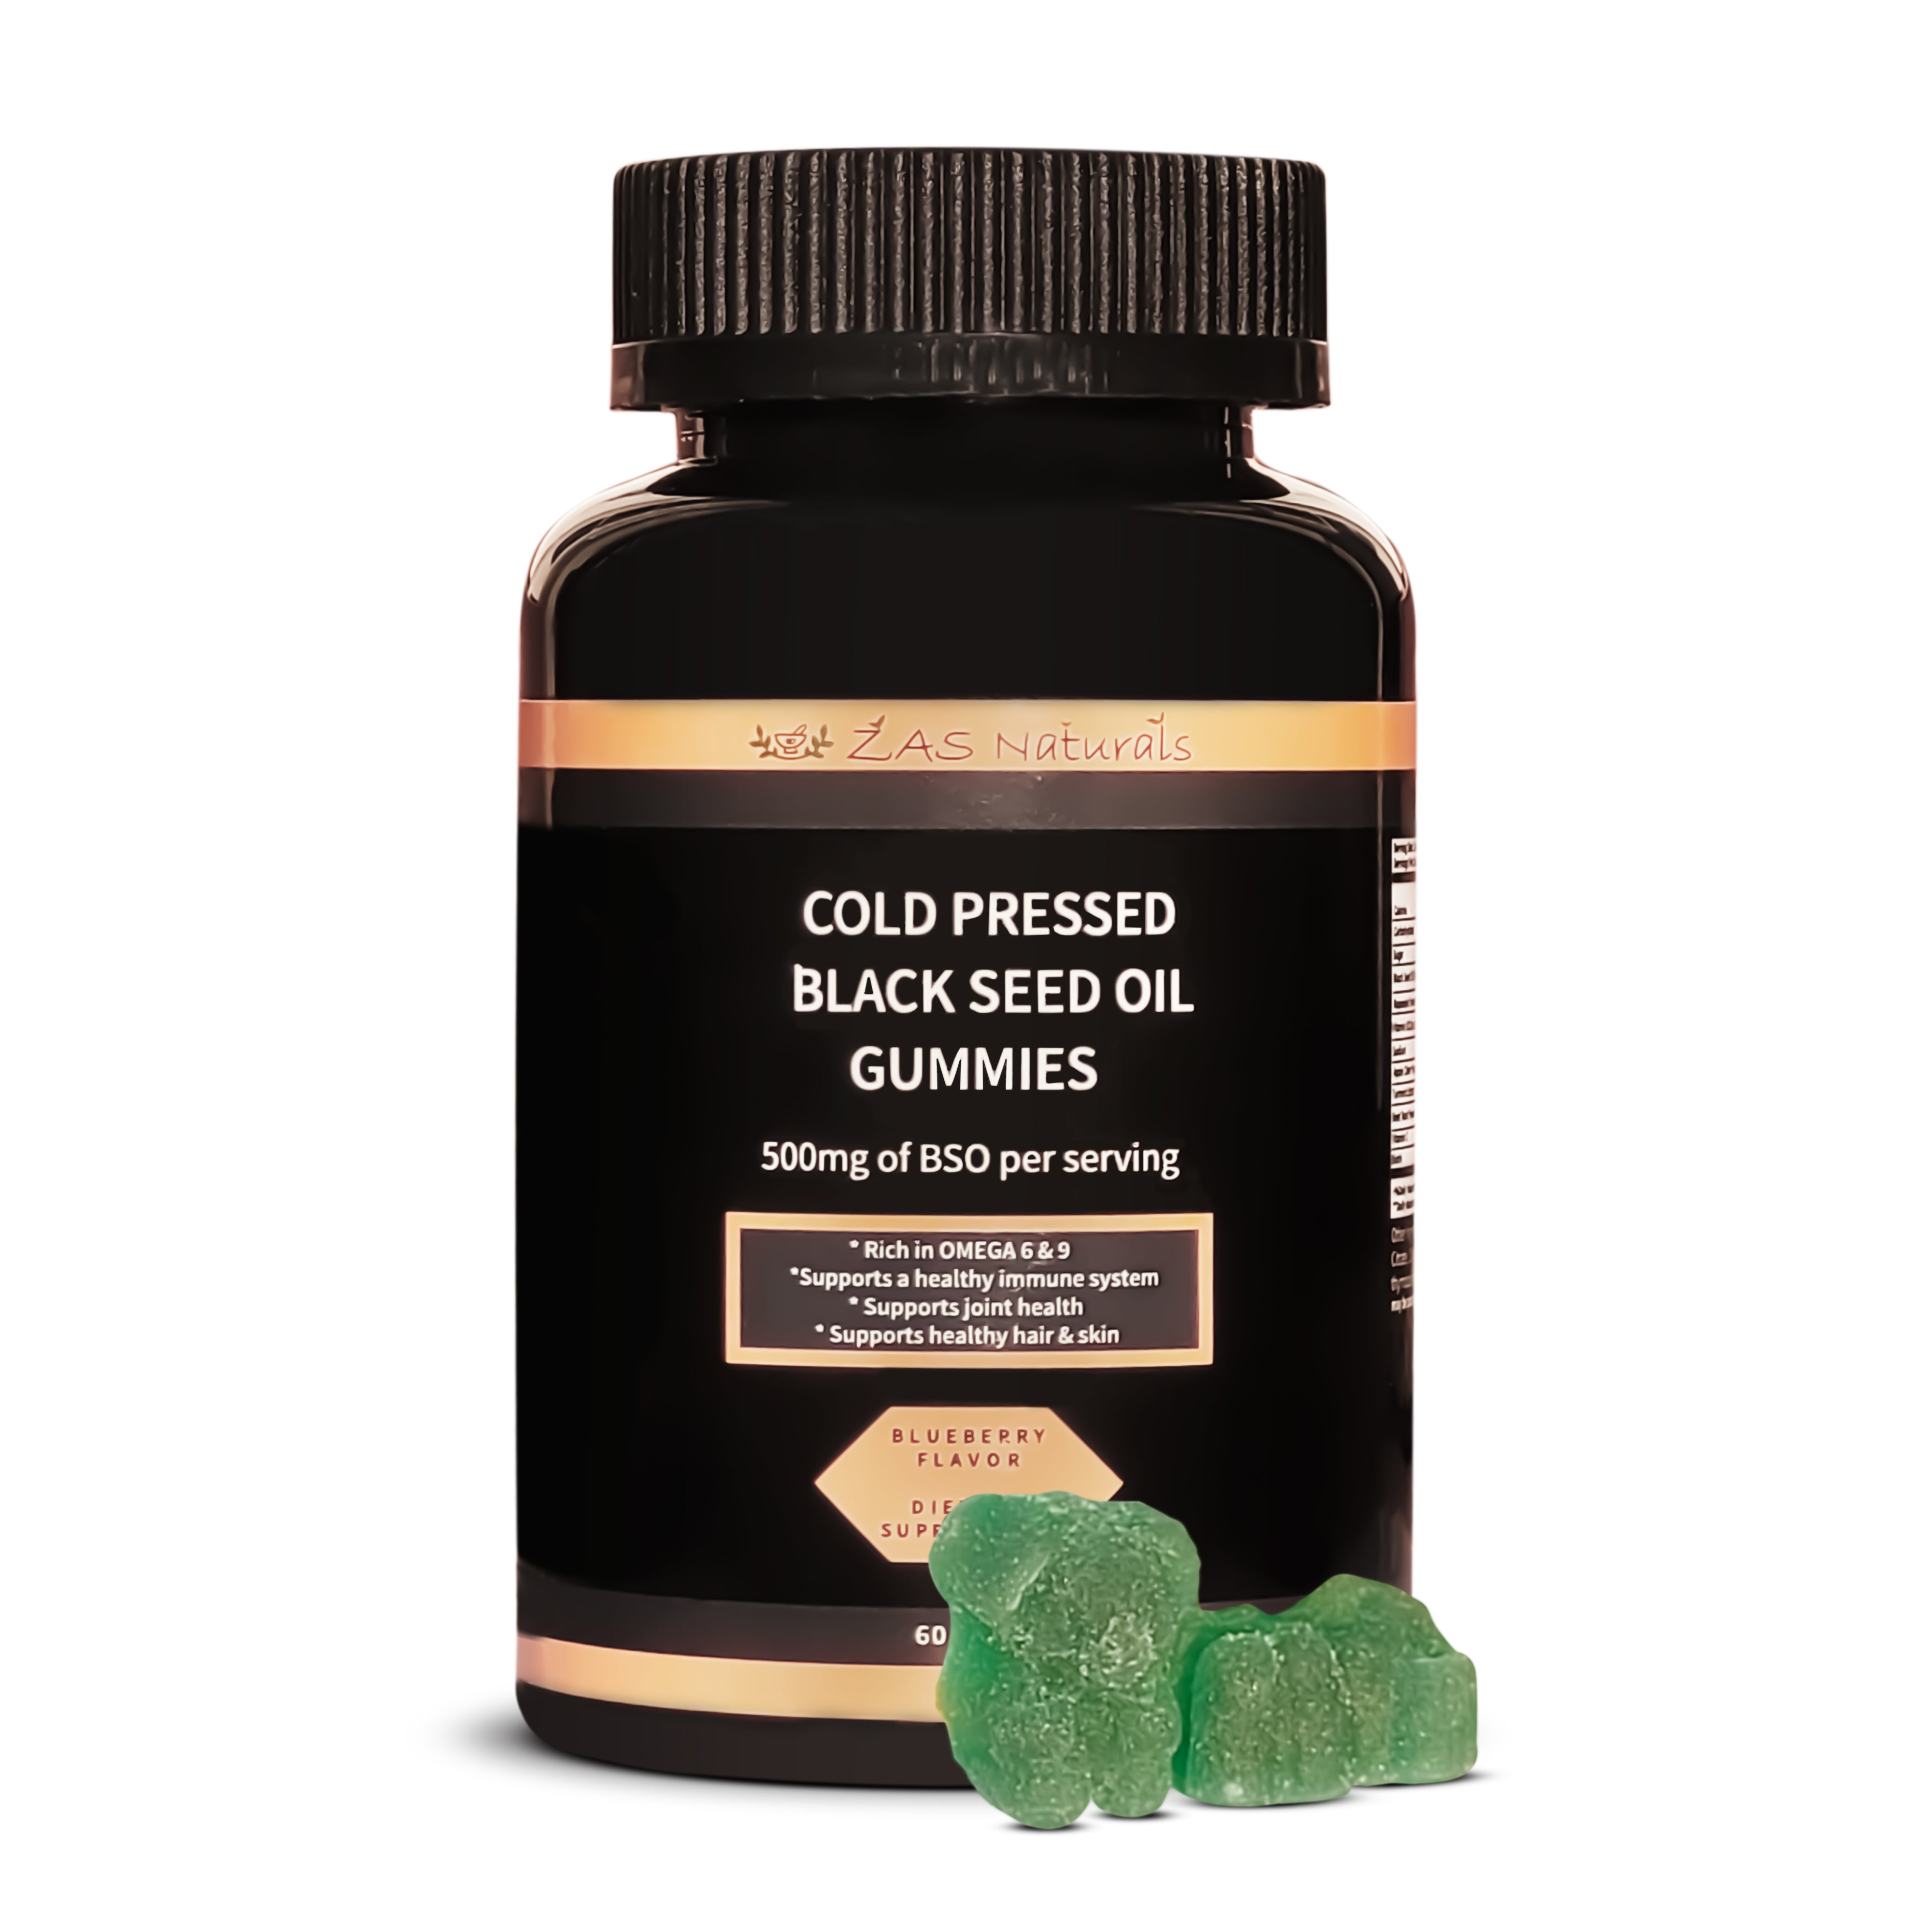 Cold Pressed Black Seed Oil Gummies for Adults and Children